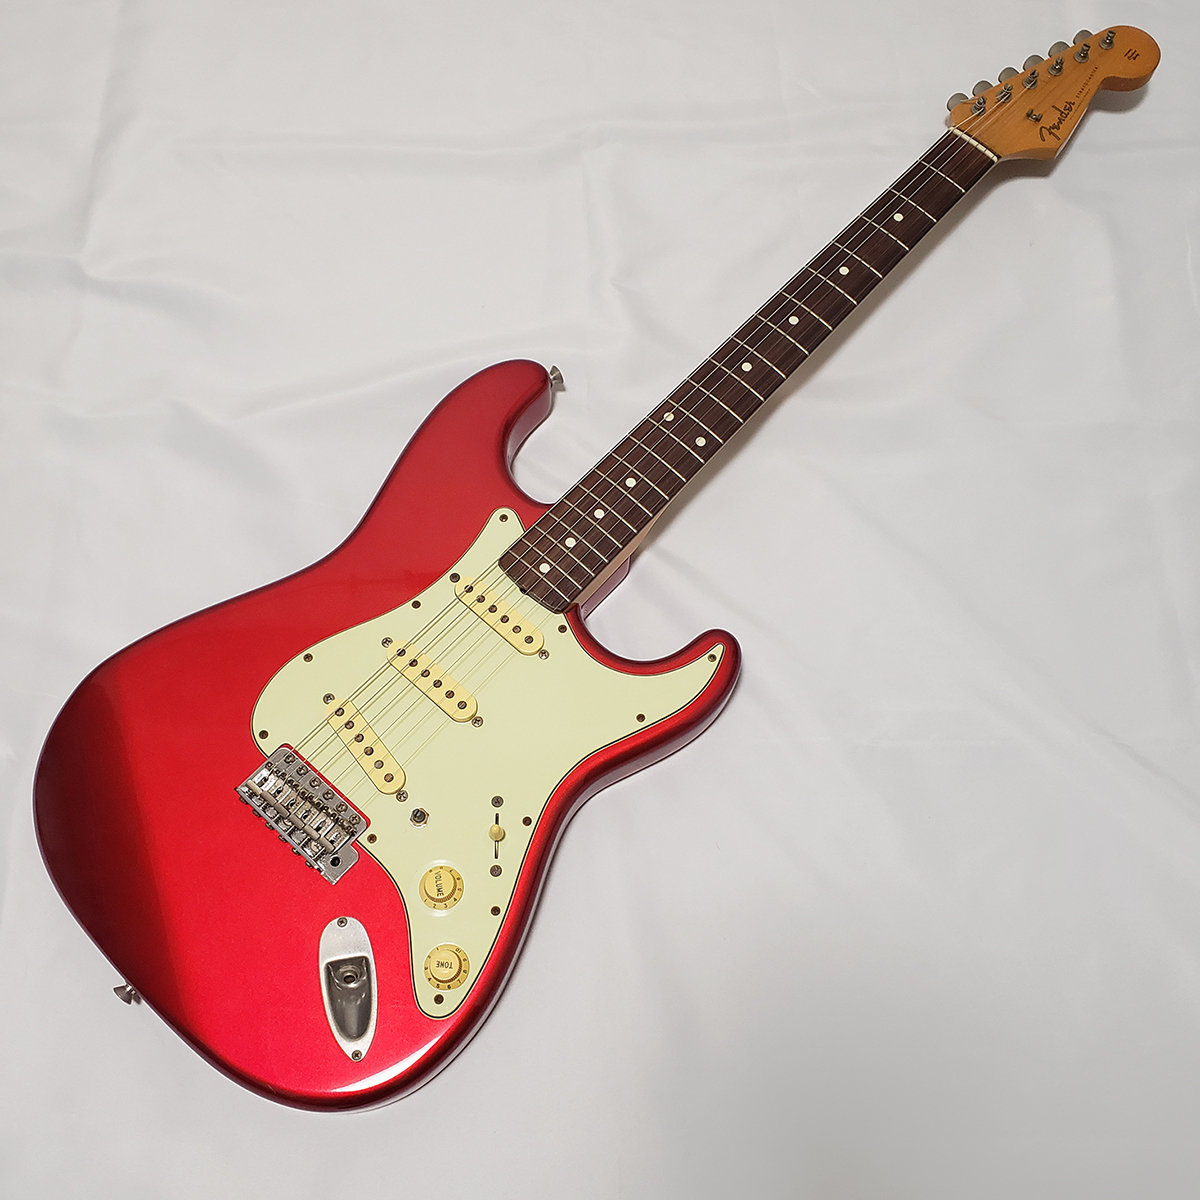 Fender Stratocaster Crafted in Japan フェンダー ストラトキャスター　Oシリアル（1998年購入）_画像1